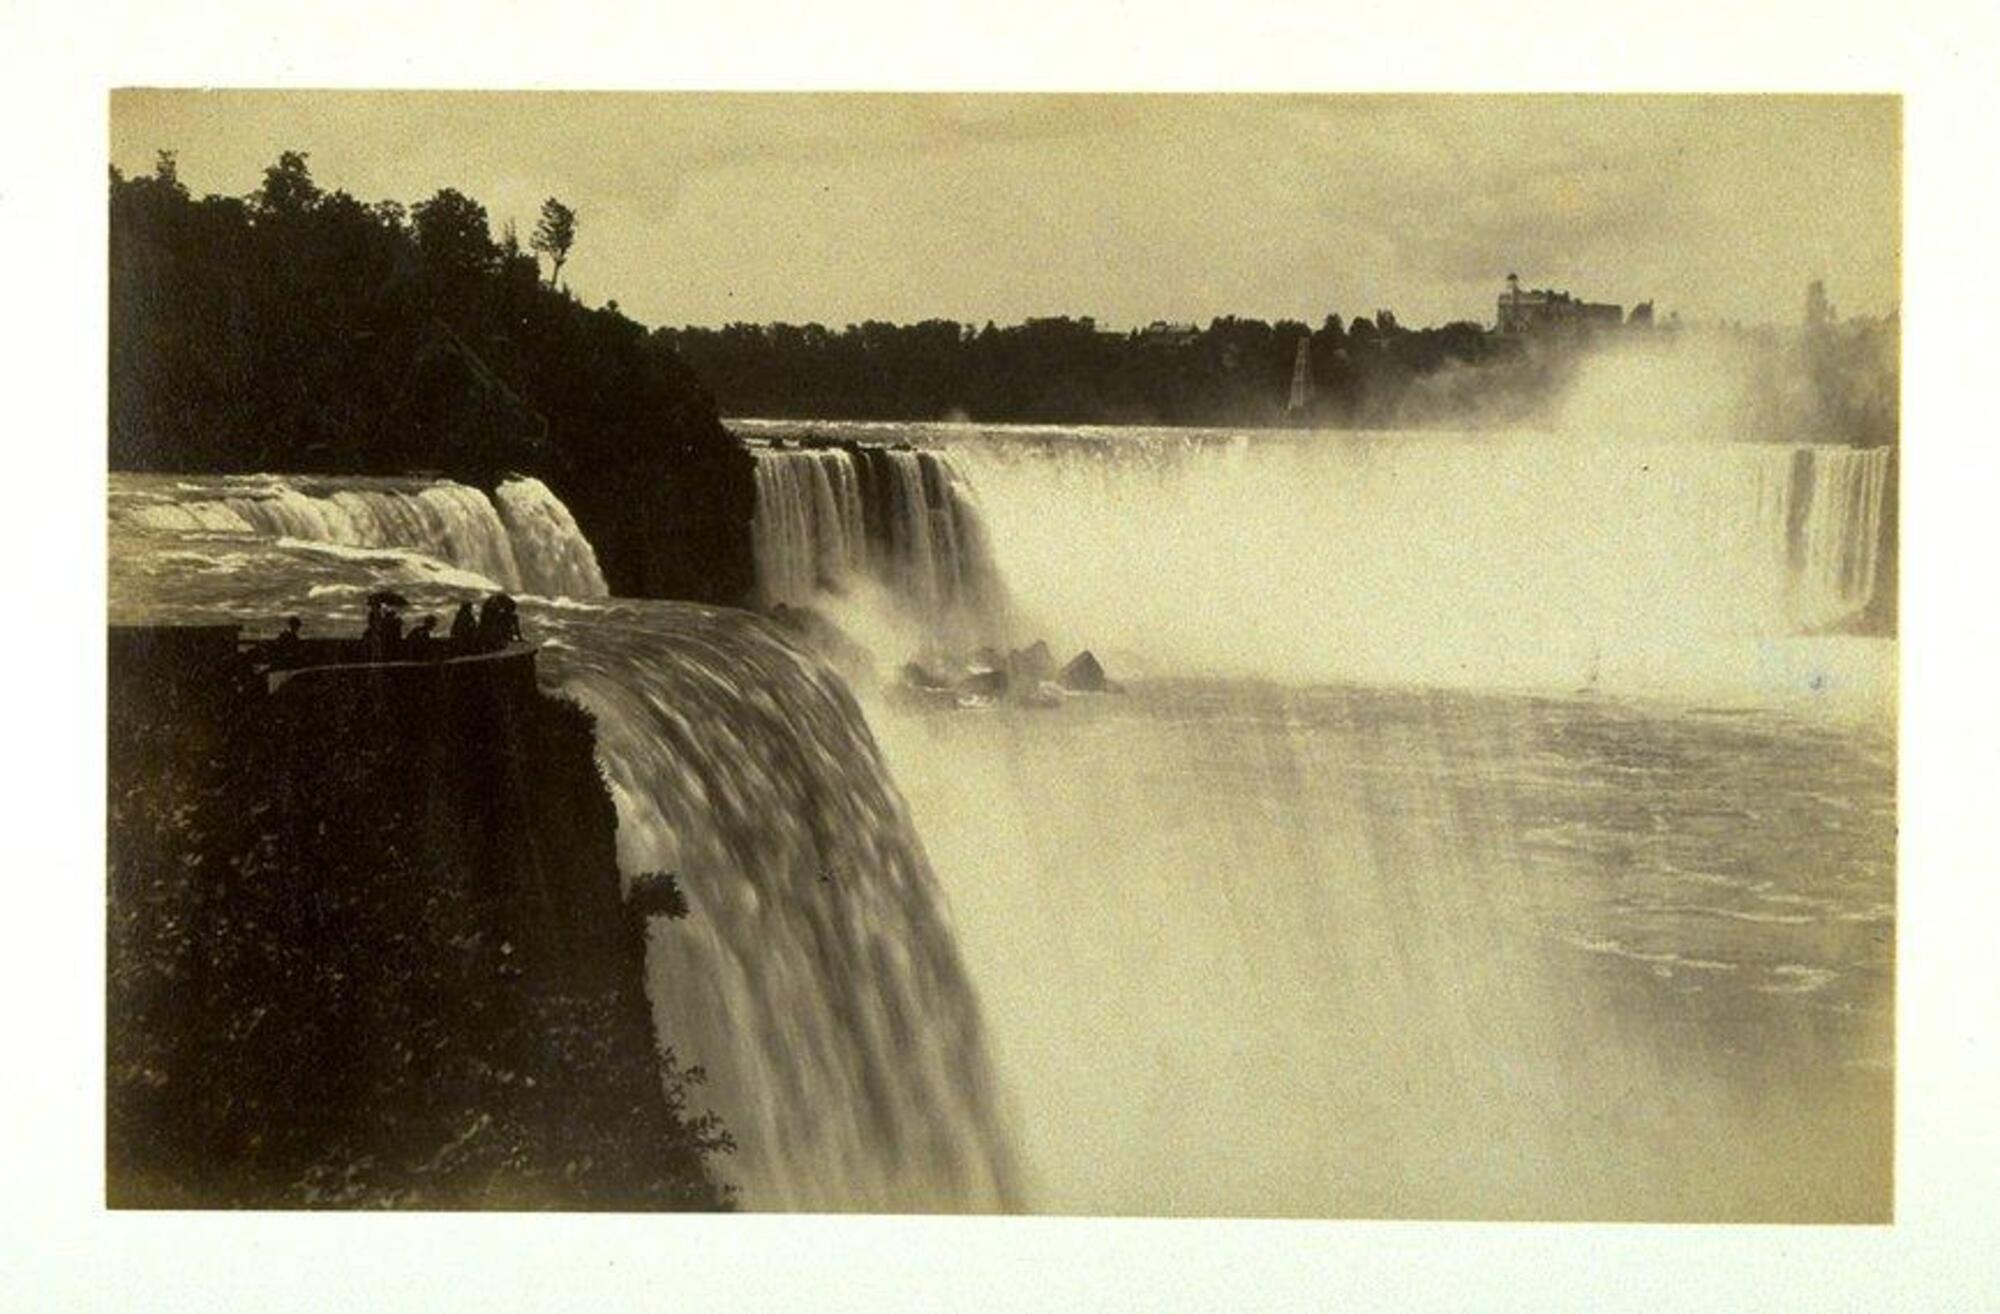 This photograph depicts a scenic view of Niagara Falls from a distance.  To the left of the image, a small group of people stand on an overlook.